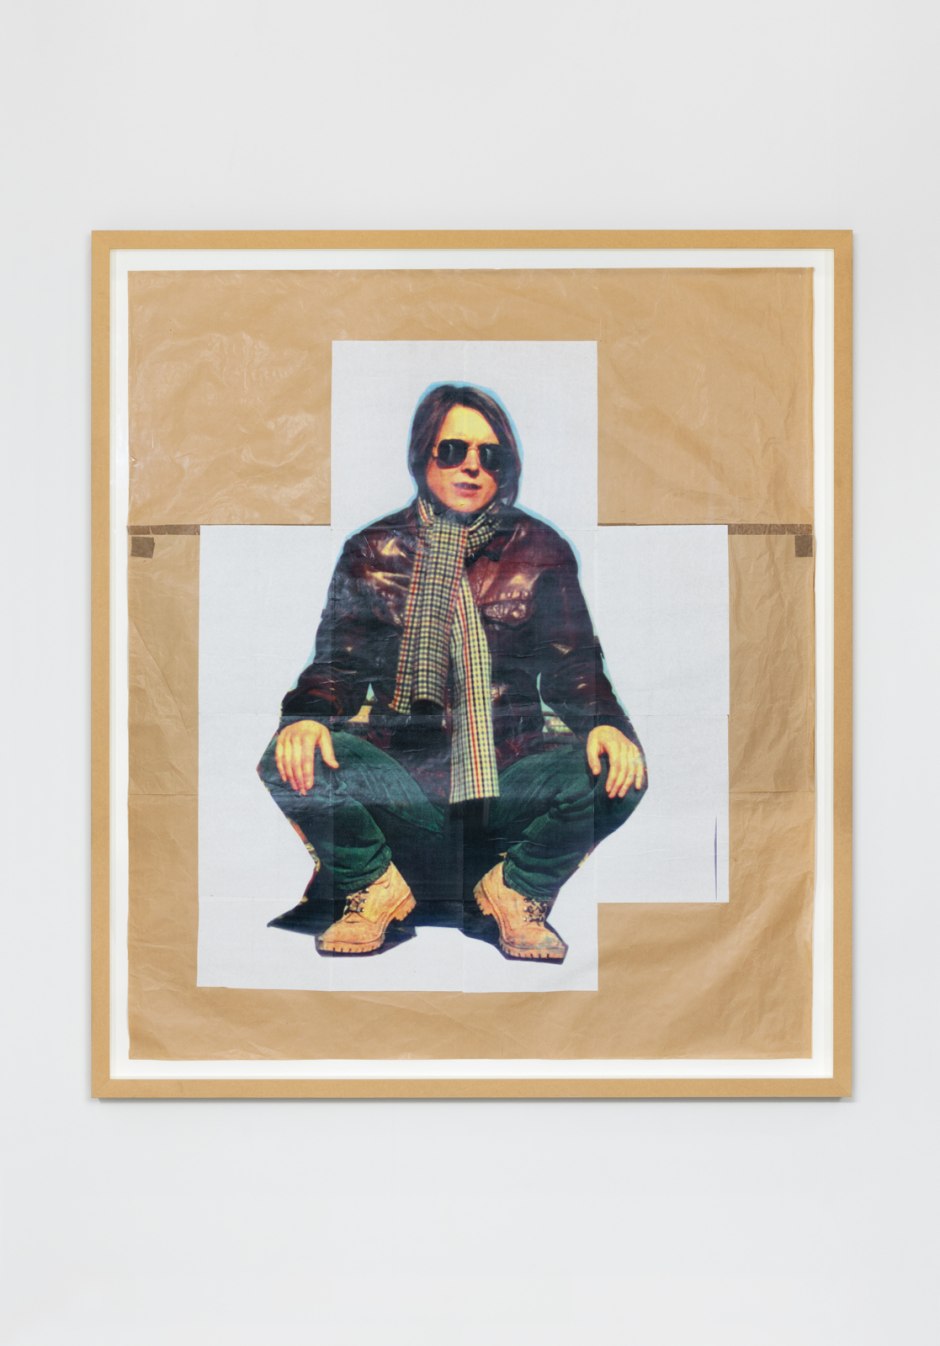 Sarah Lucas  Self-portrait, 1993  colour photocopies on cut-and-paste brown paper  site size: 175.26 x 149.86 cm / 69 x 59 in frame size: 188.5 x 165 x 8.5 cm / 74 ¼ x 65 x 3 ⅜ in